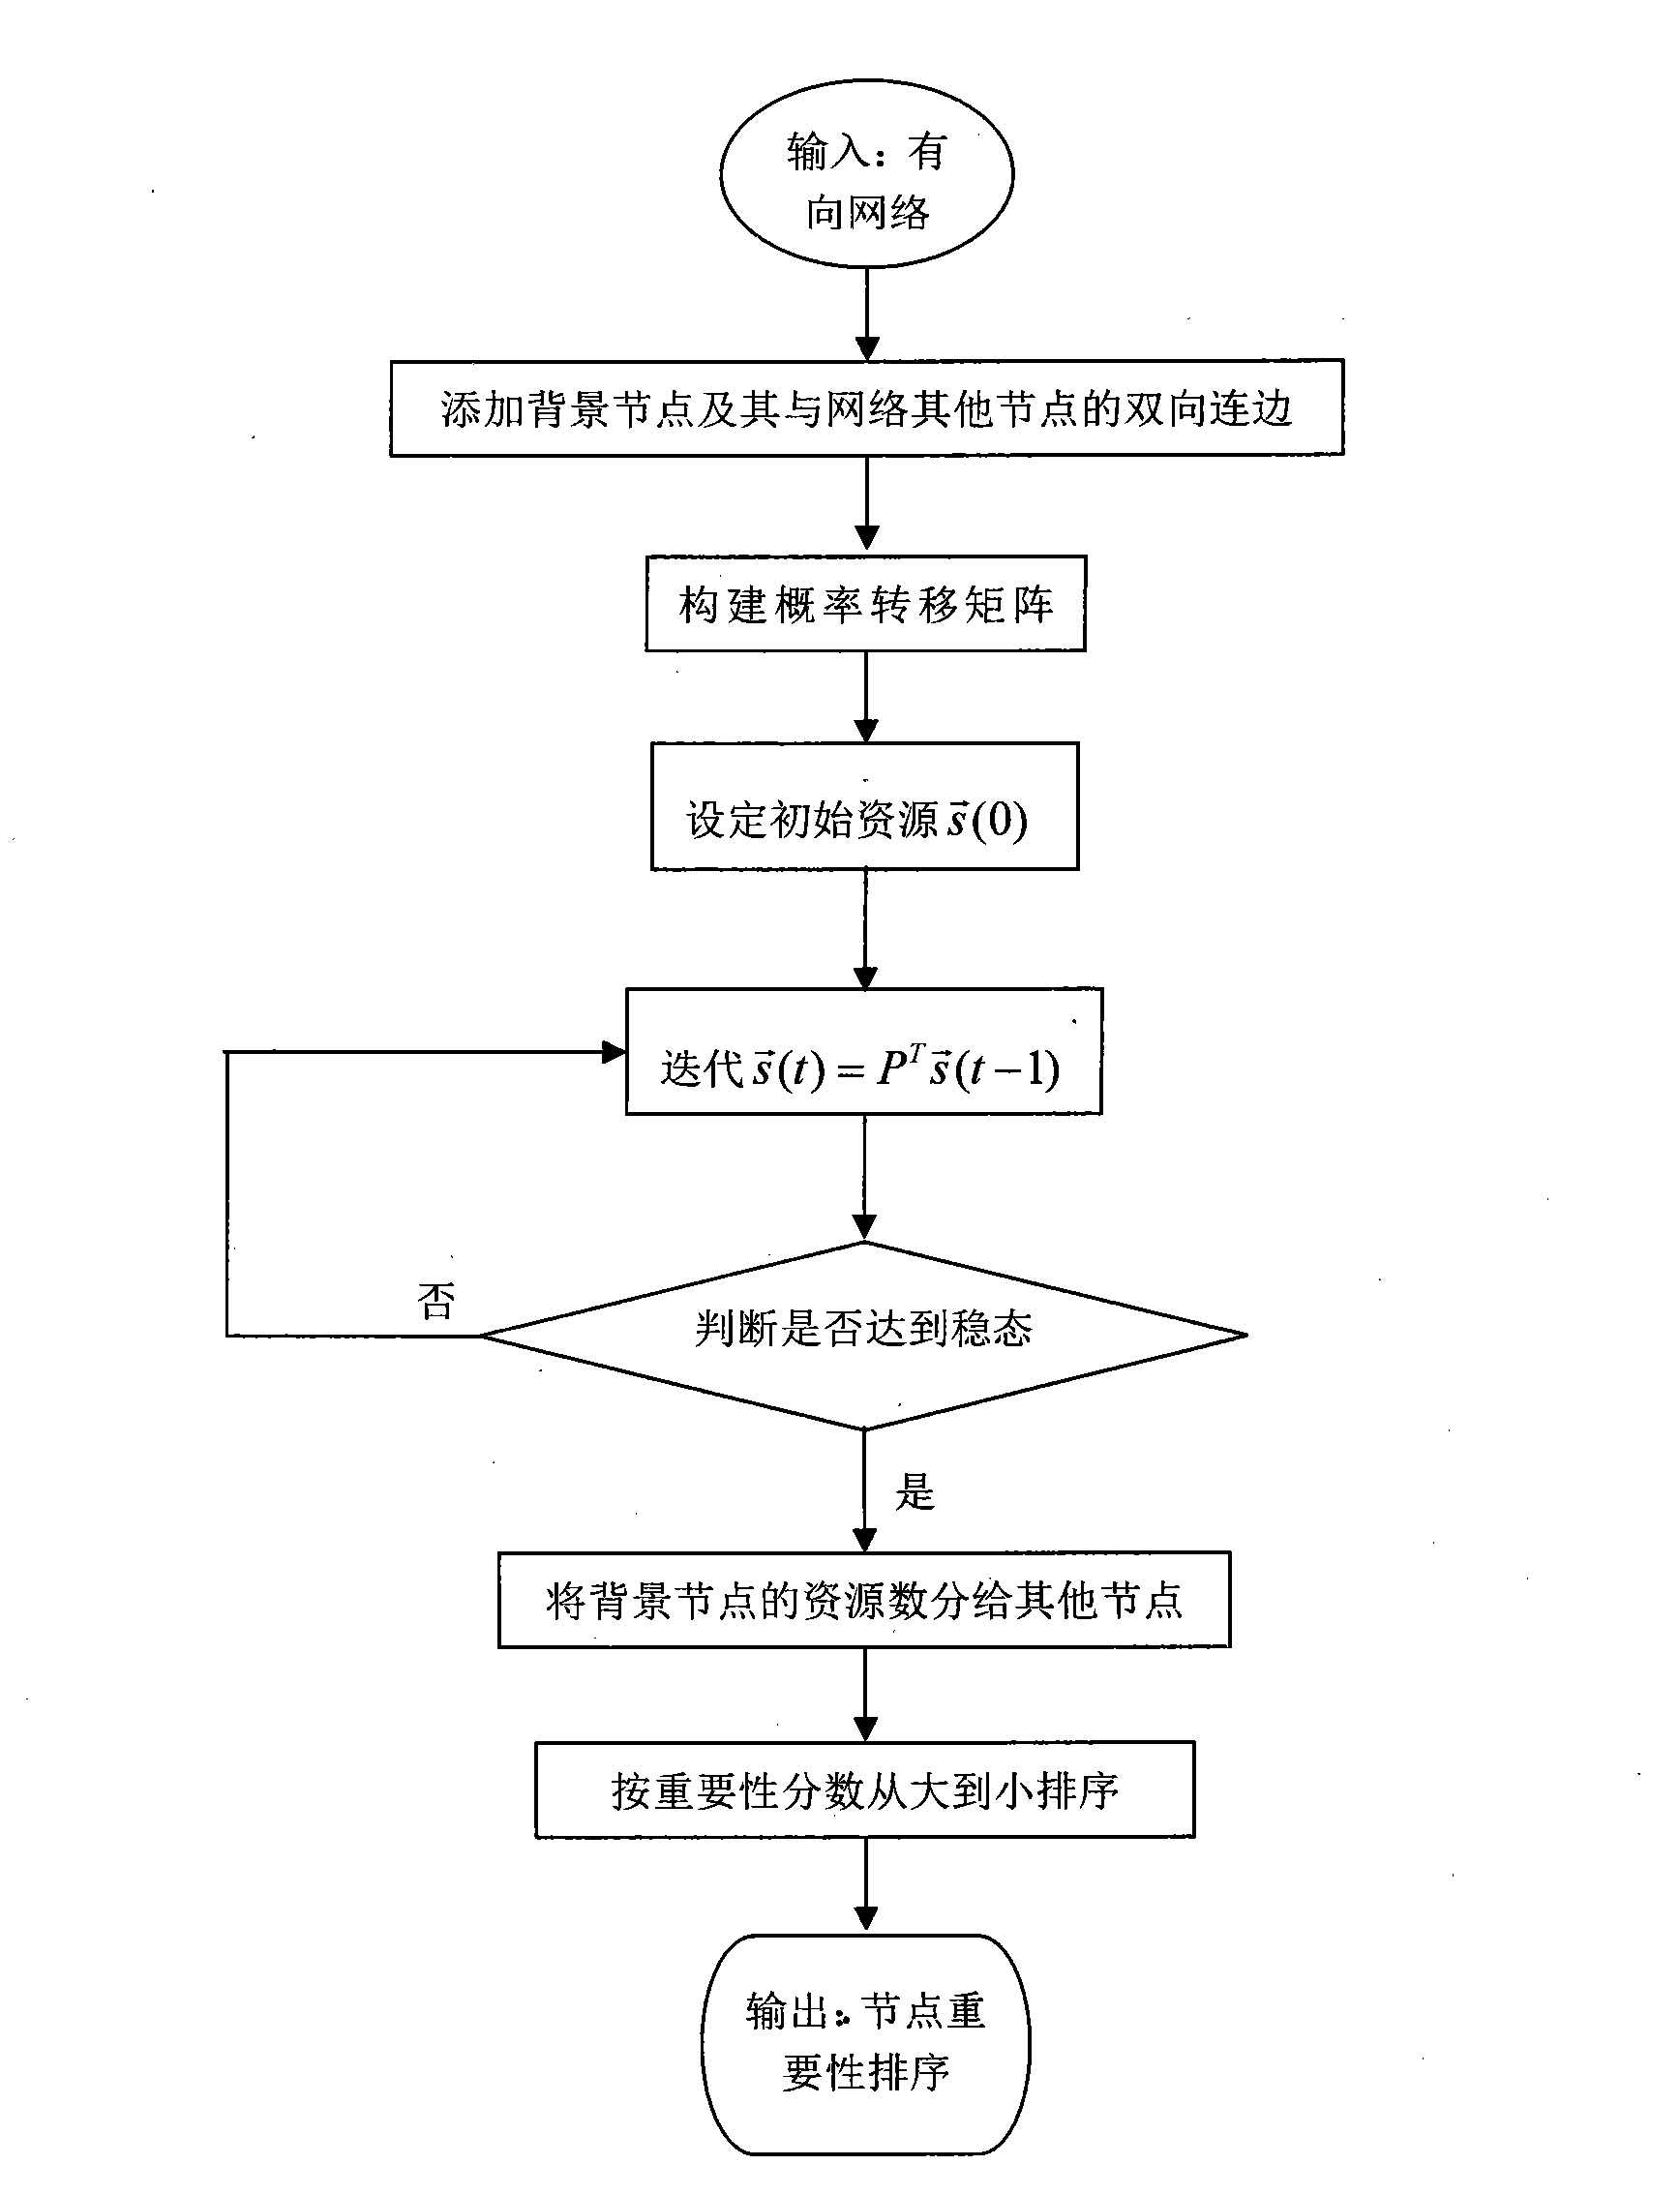 Sequencing method of node importance in network